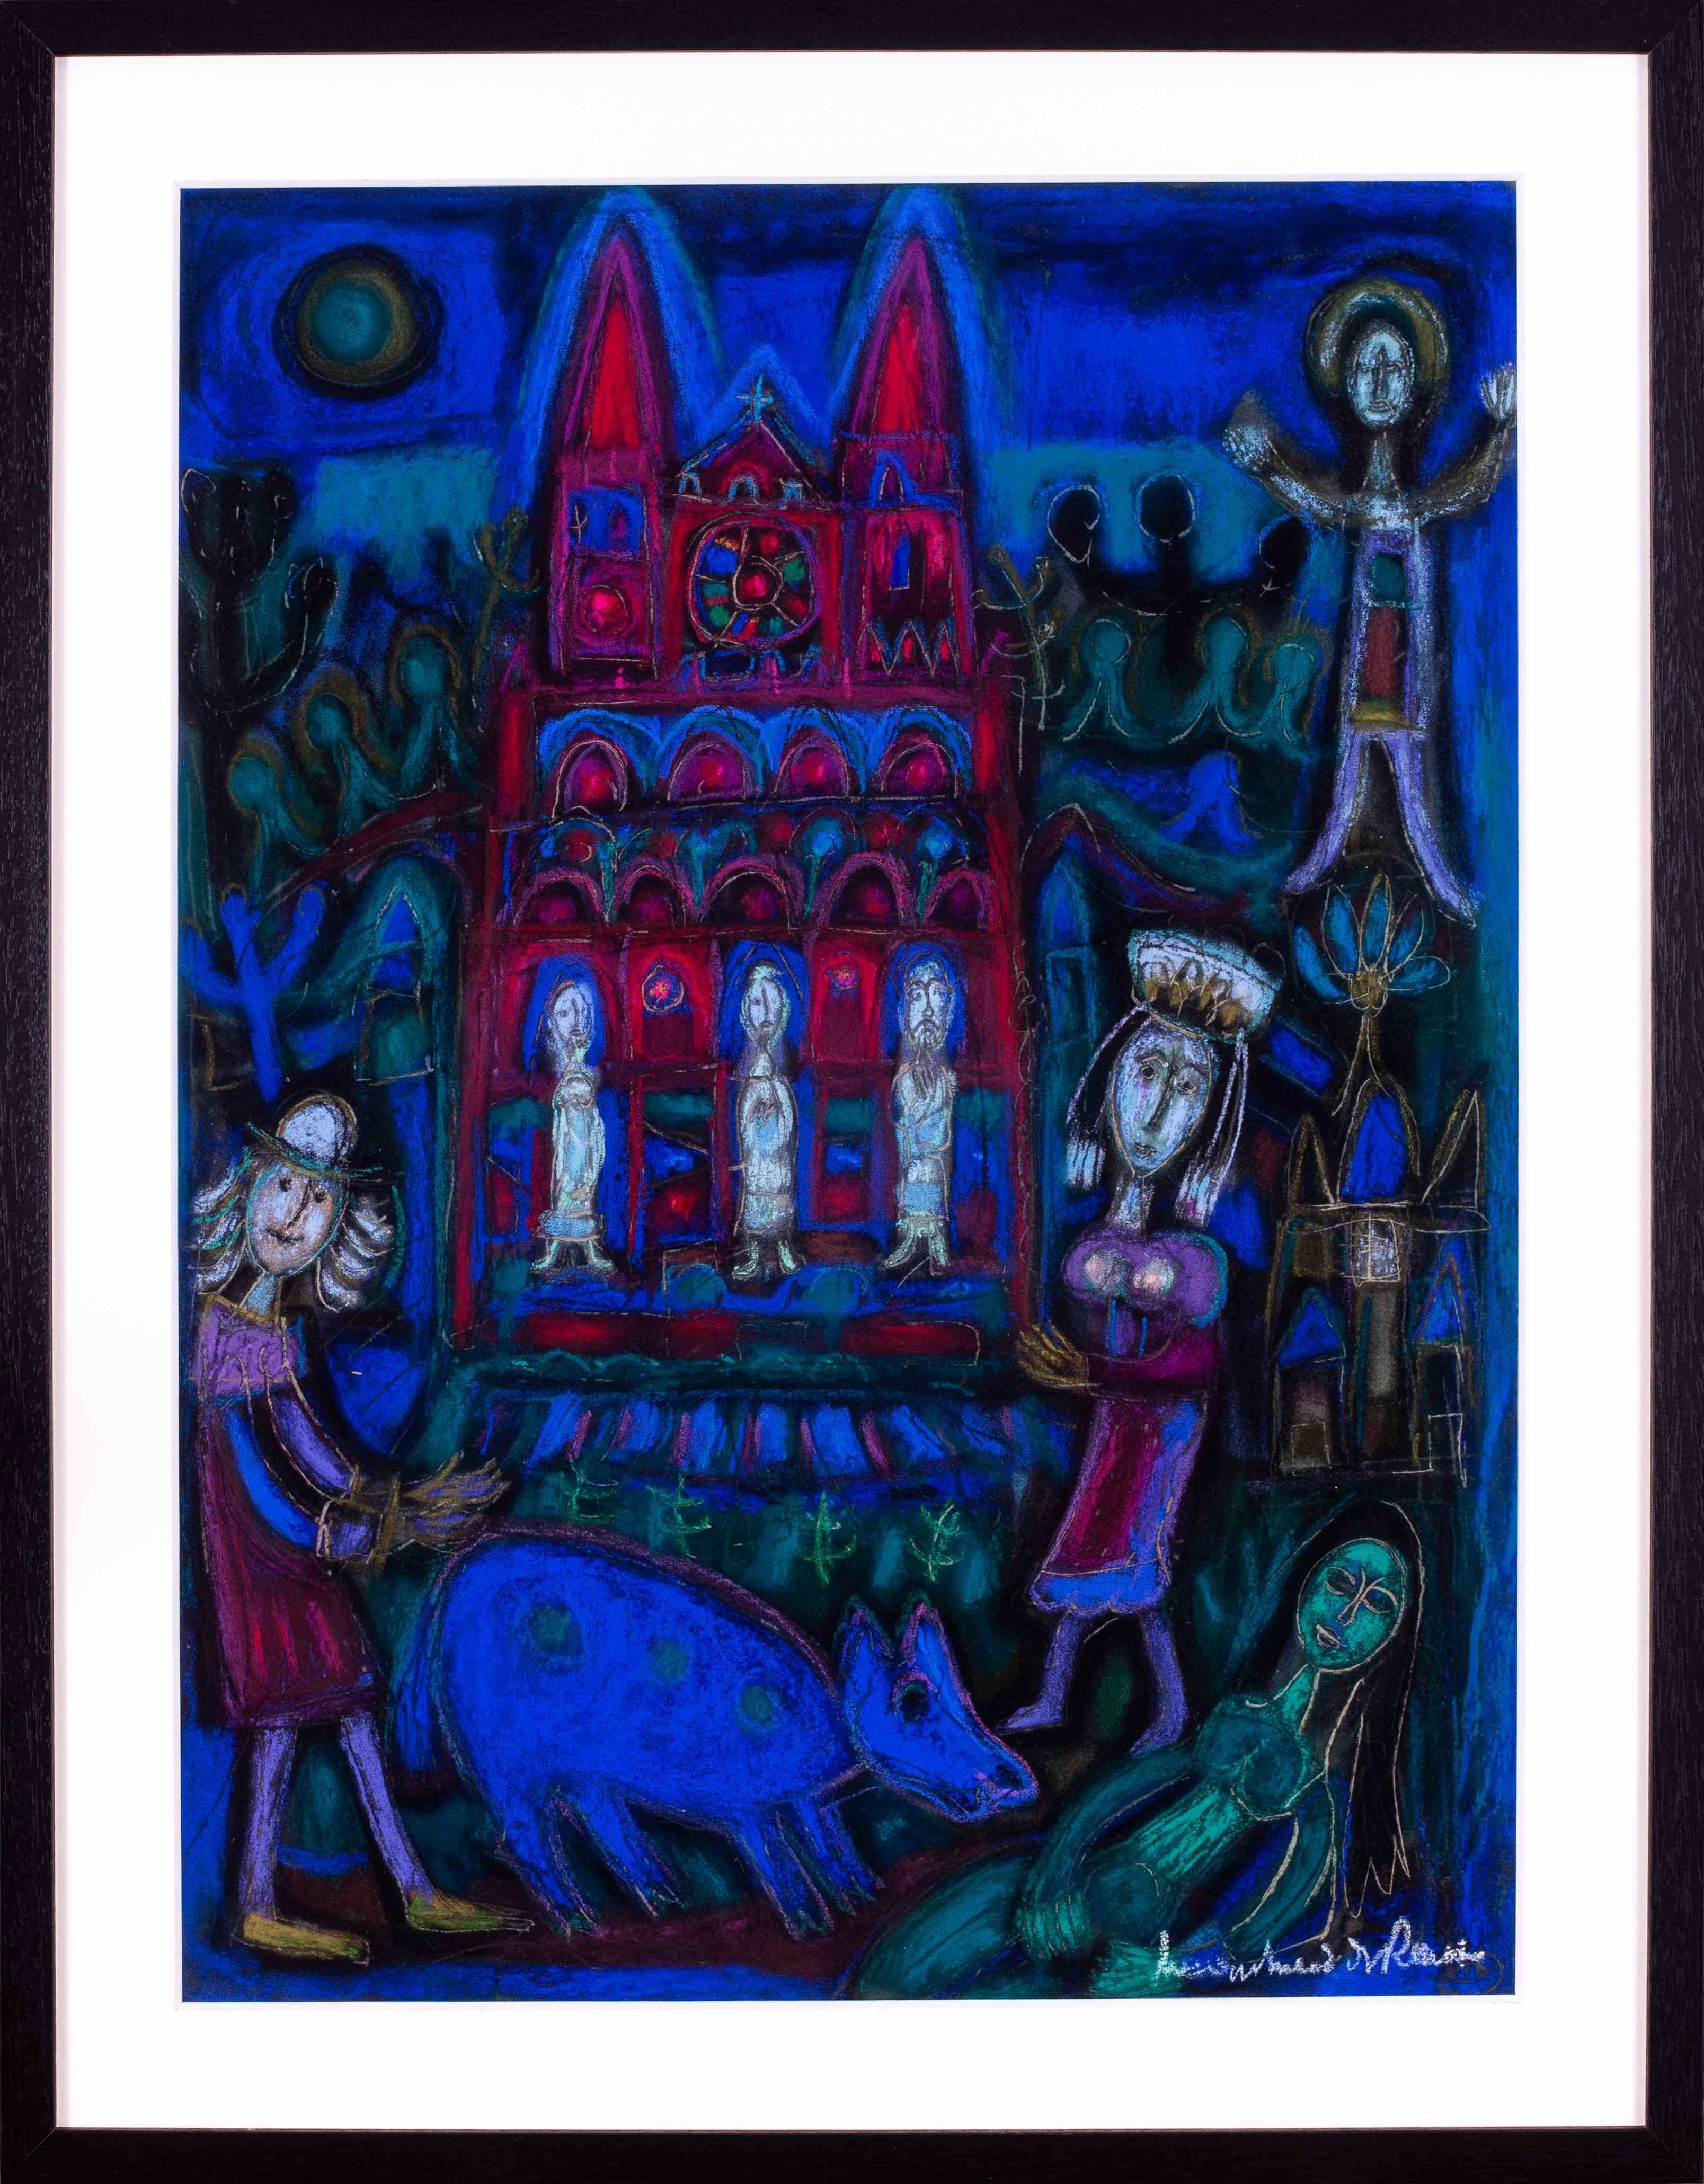 Louis Marchand des Raux Figurative Art - French Surrealist pastel drawing  'In front of the church' by Marchand des Raux